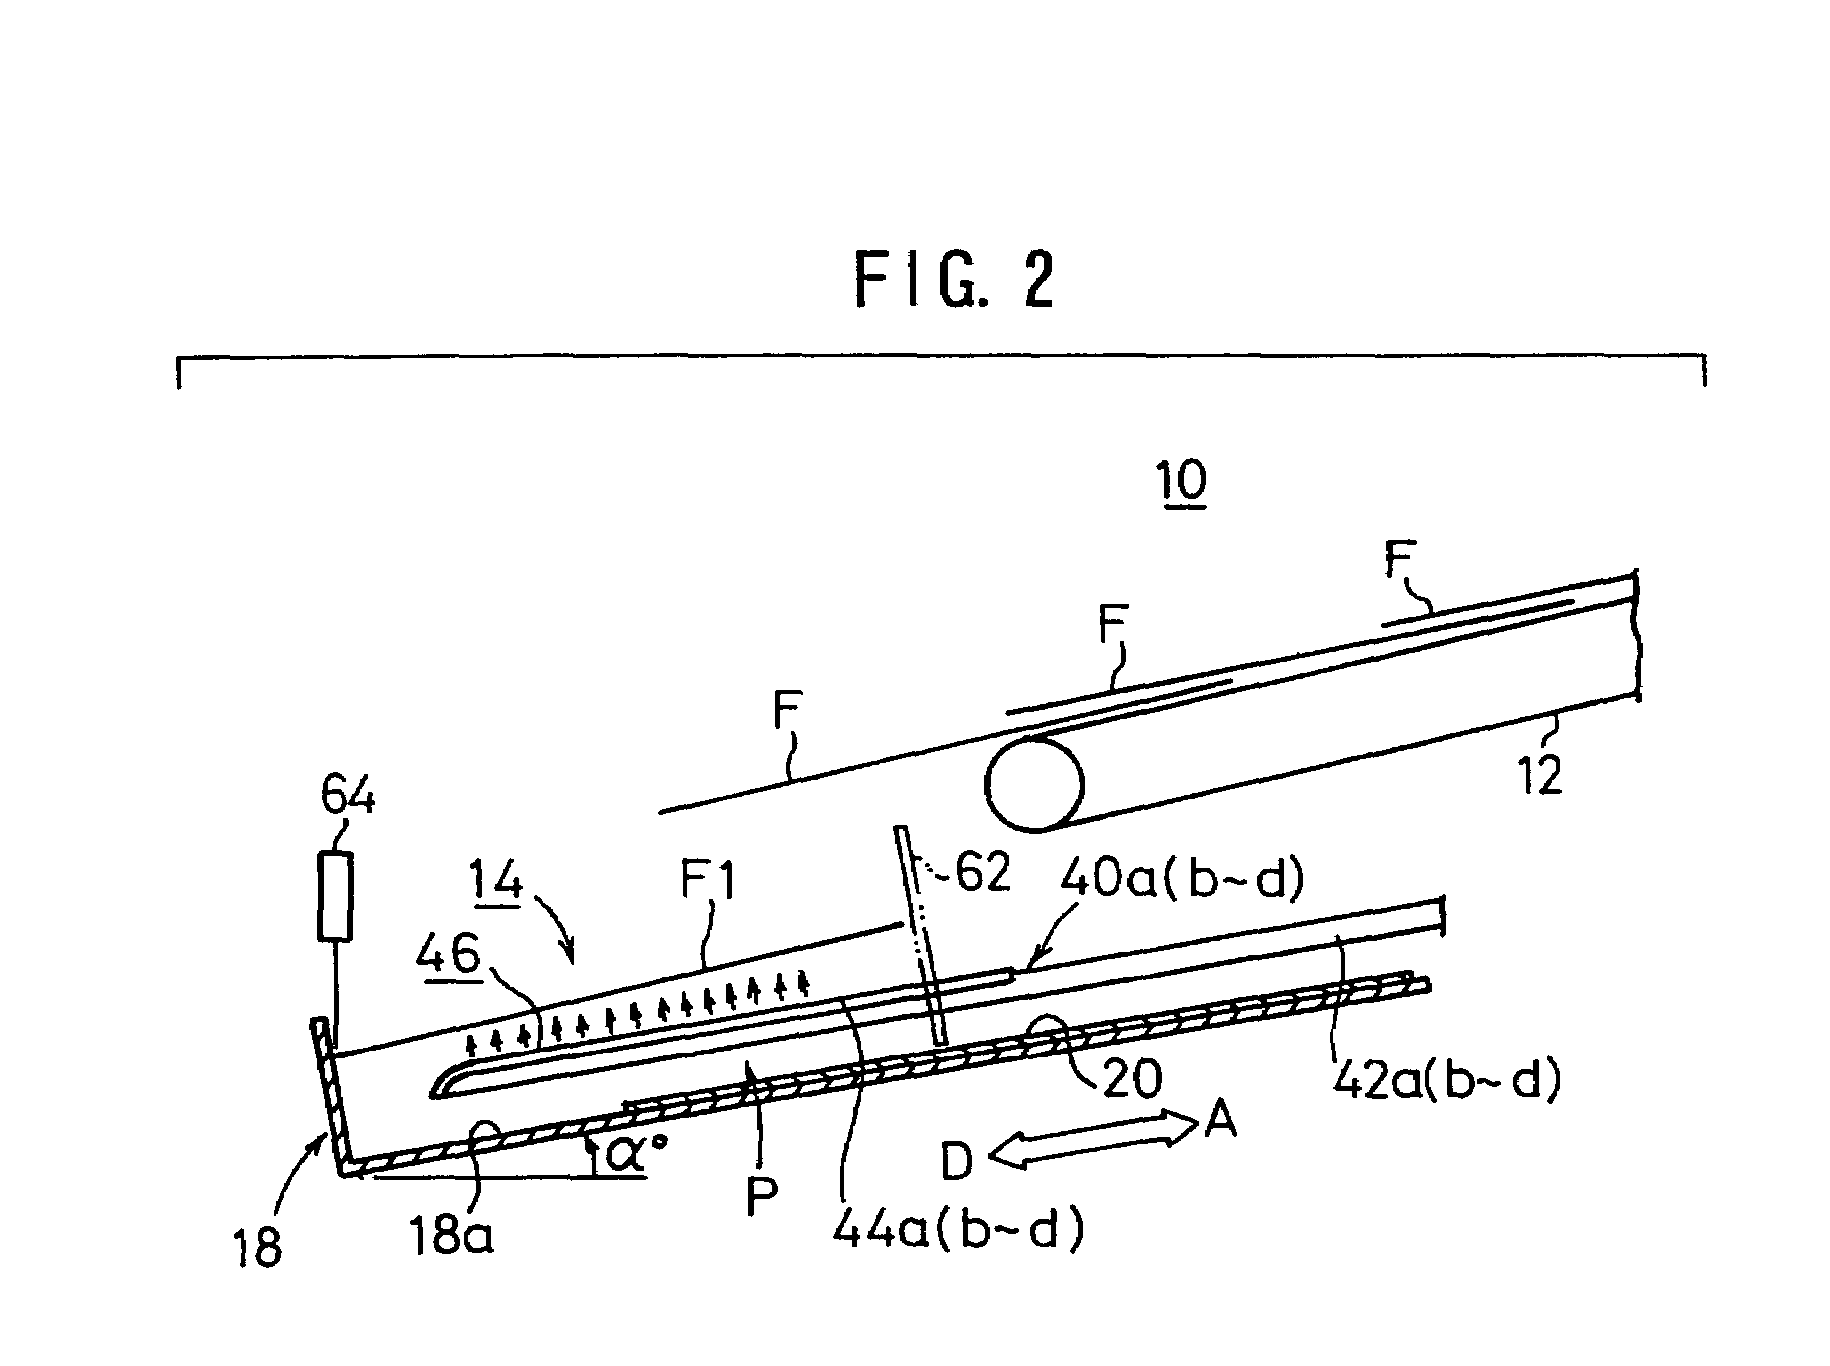 Apparatus for stacking sheet members, apparatus for measuring dimensions of sheet members, and apparatus for and method of marking sheet members